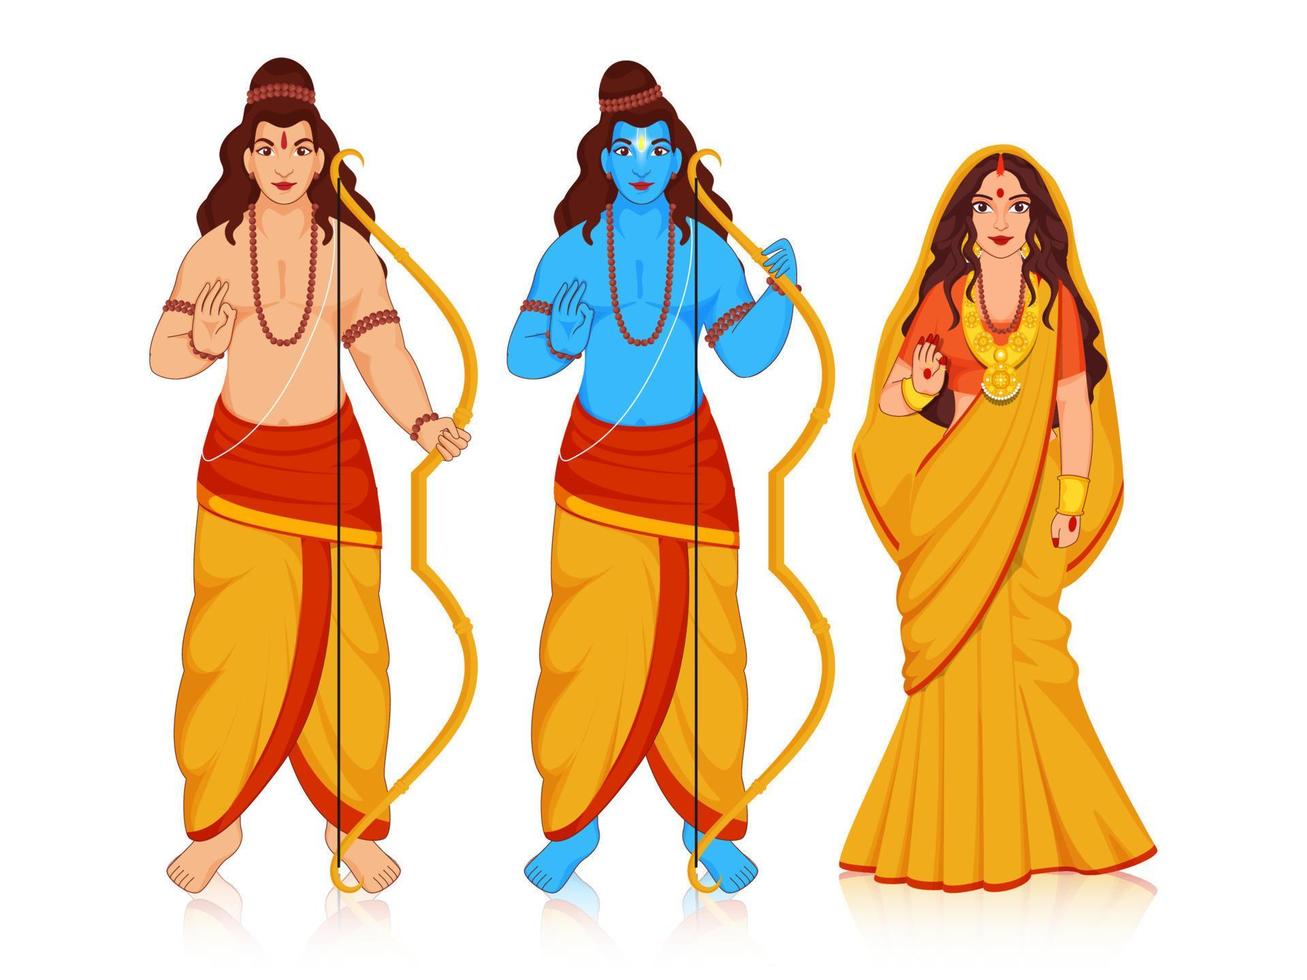 Hindu Mythology Lord Rama with His Wife Sita and Brother Laxman Giving Blessings Together in Standing Pose on White Background. vector